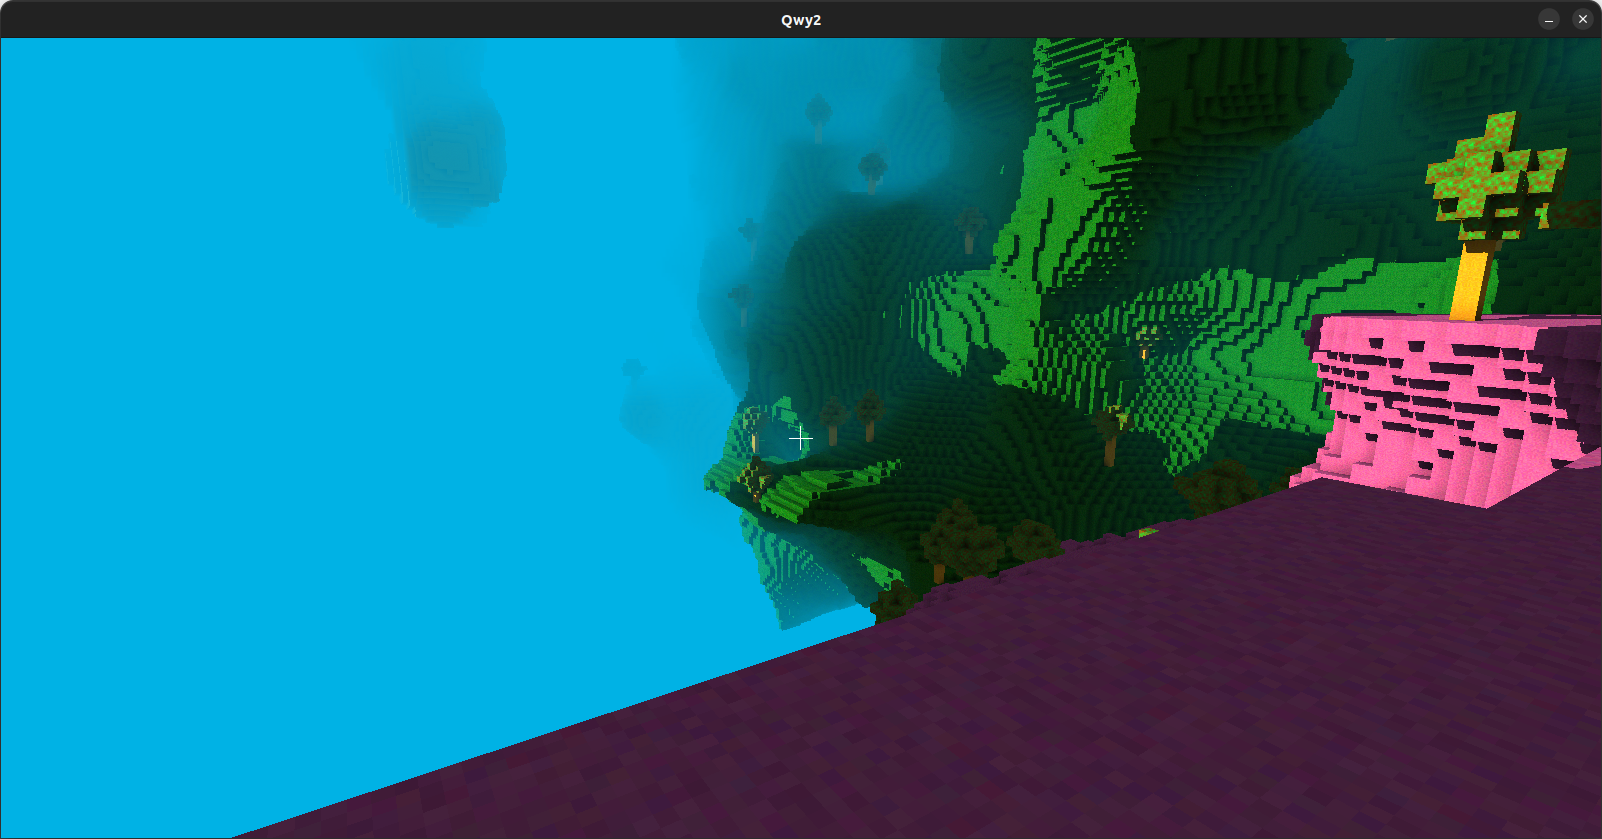 Image of some Qwy2 world with two biomes near some empty sky.